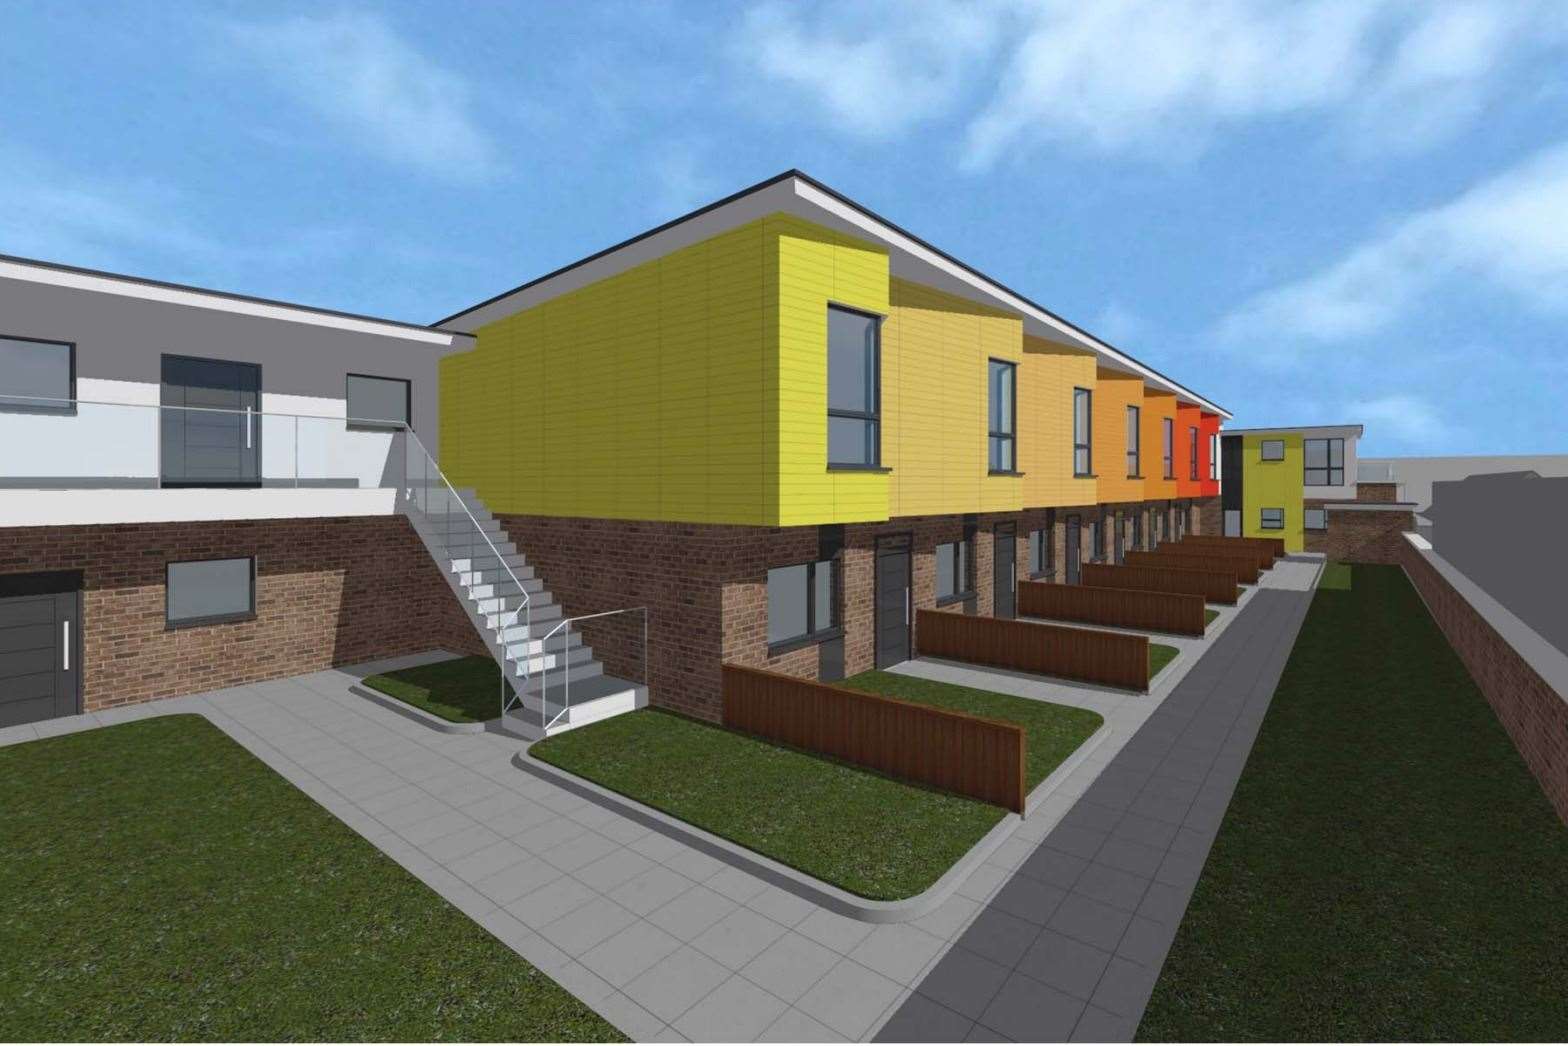 An architect's impression of what the homes above and behind Gillingham's Poundland could look like. Picture: Terrarossa Project